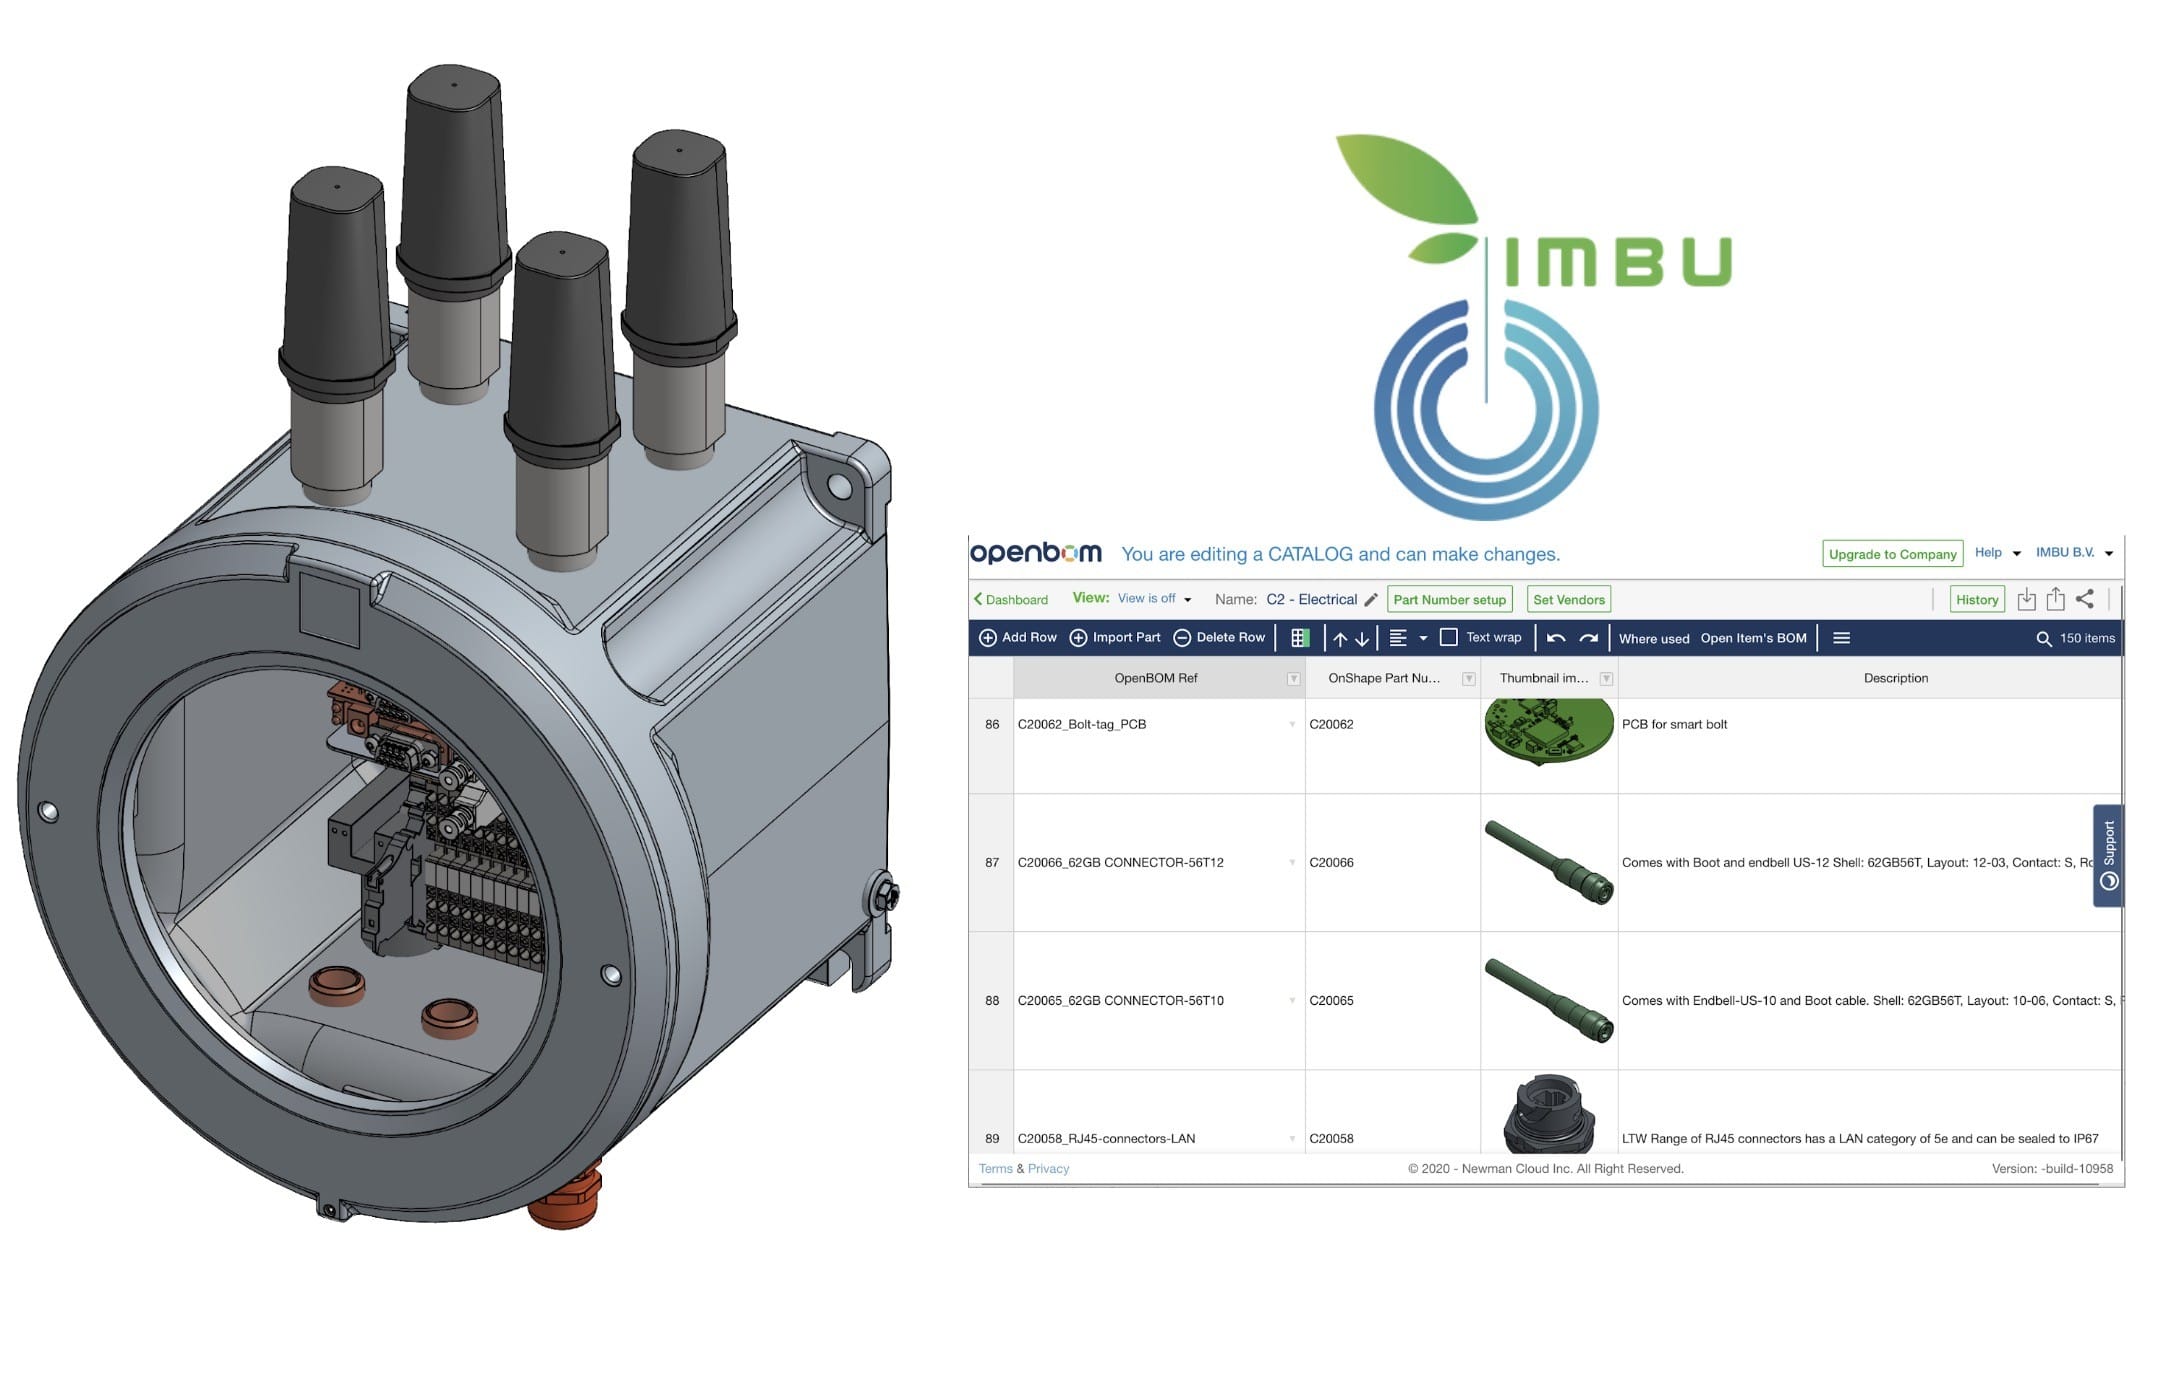 Customer Story IMBU BV: We Like The Simplicity And Portability of OpenBOM. It Just Works!